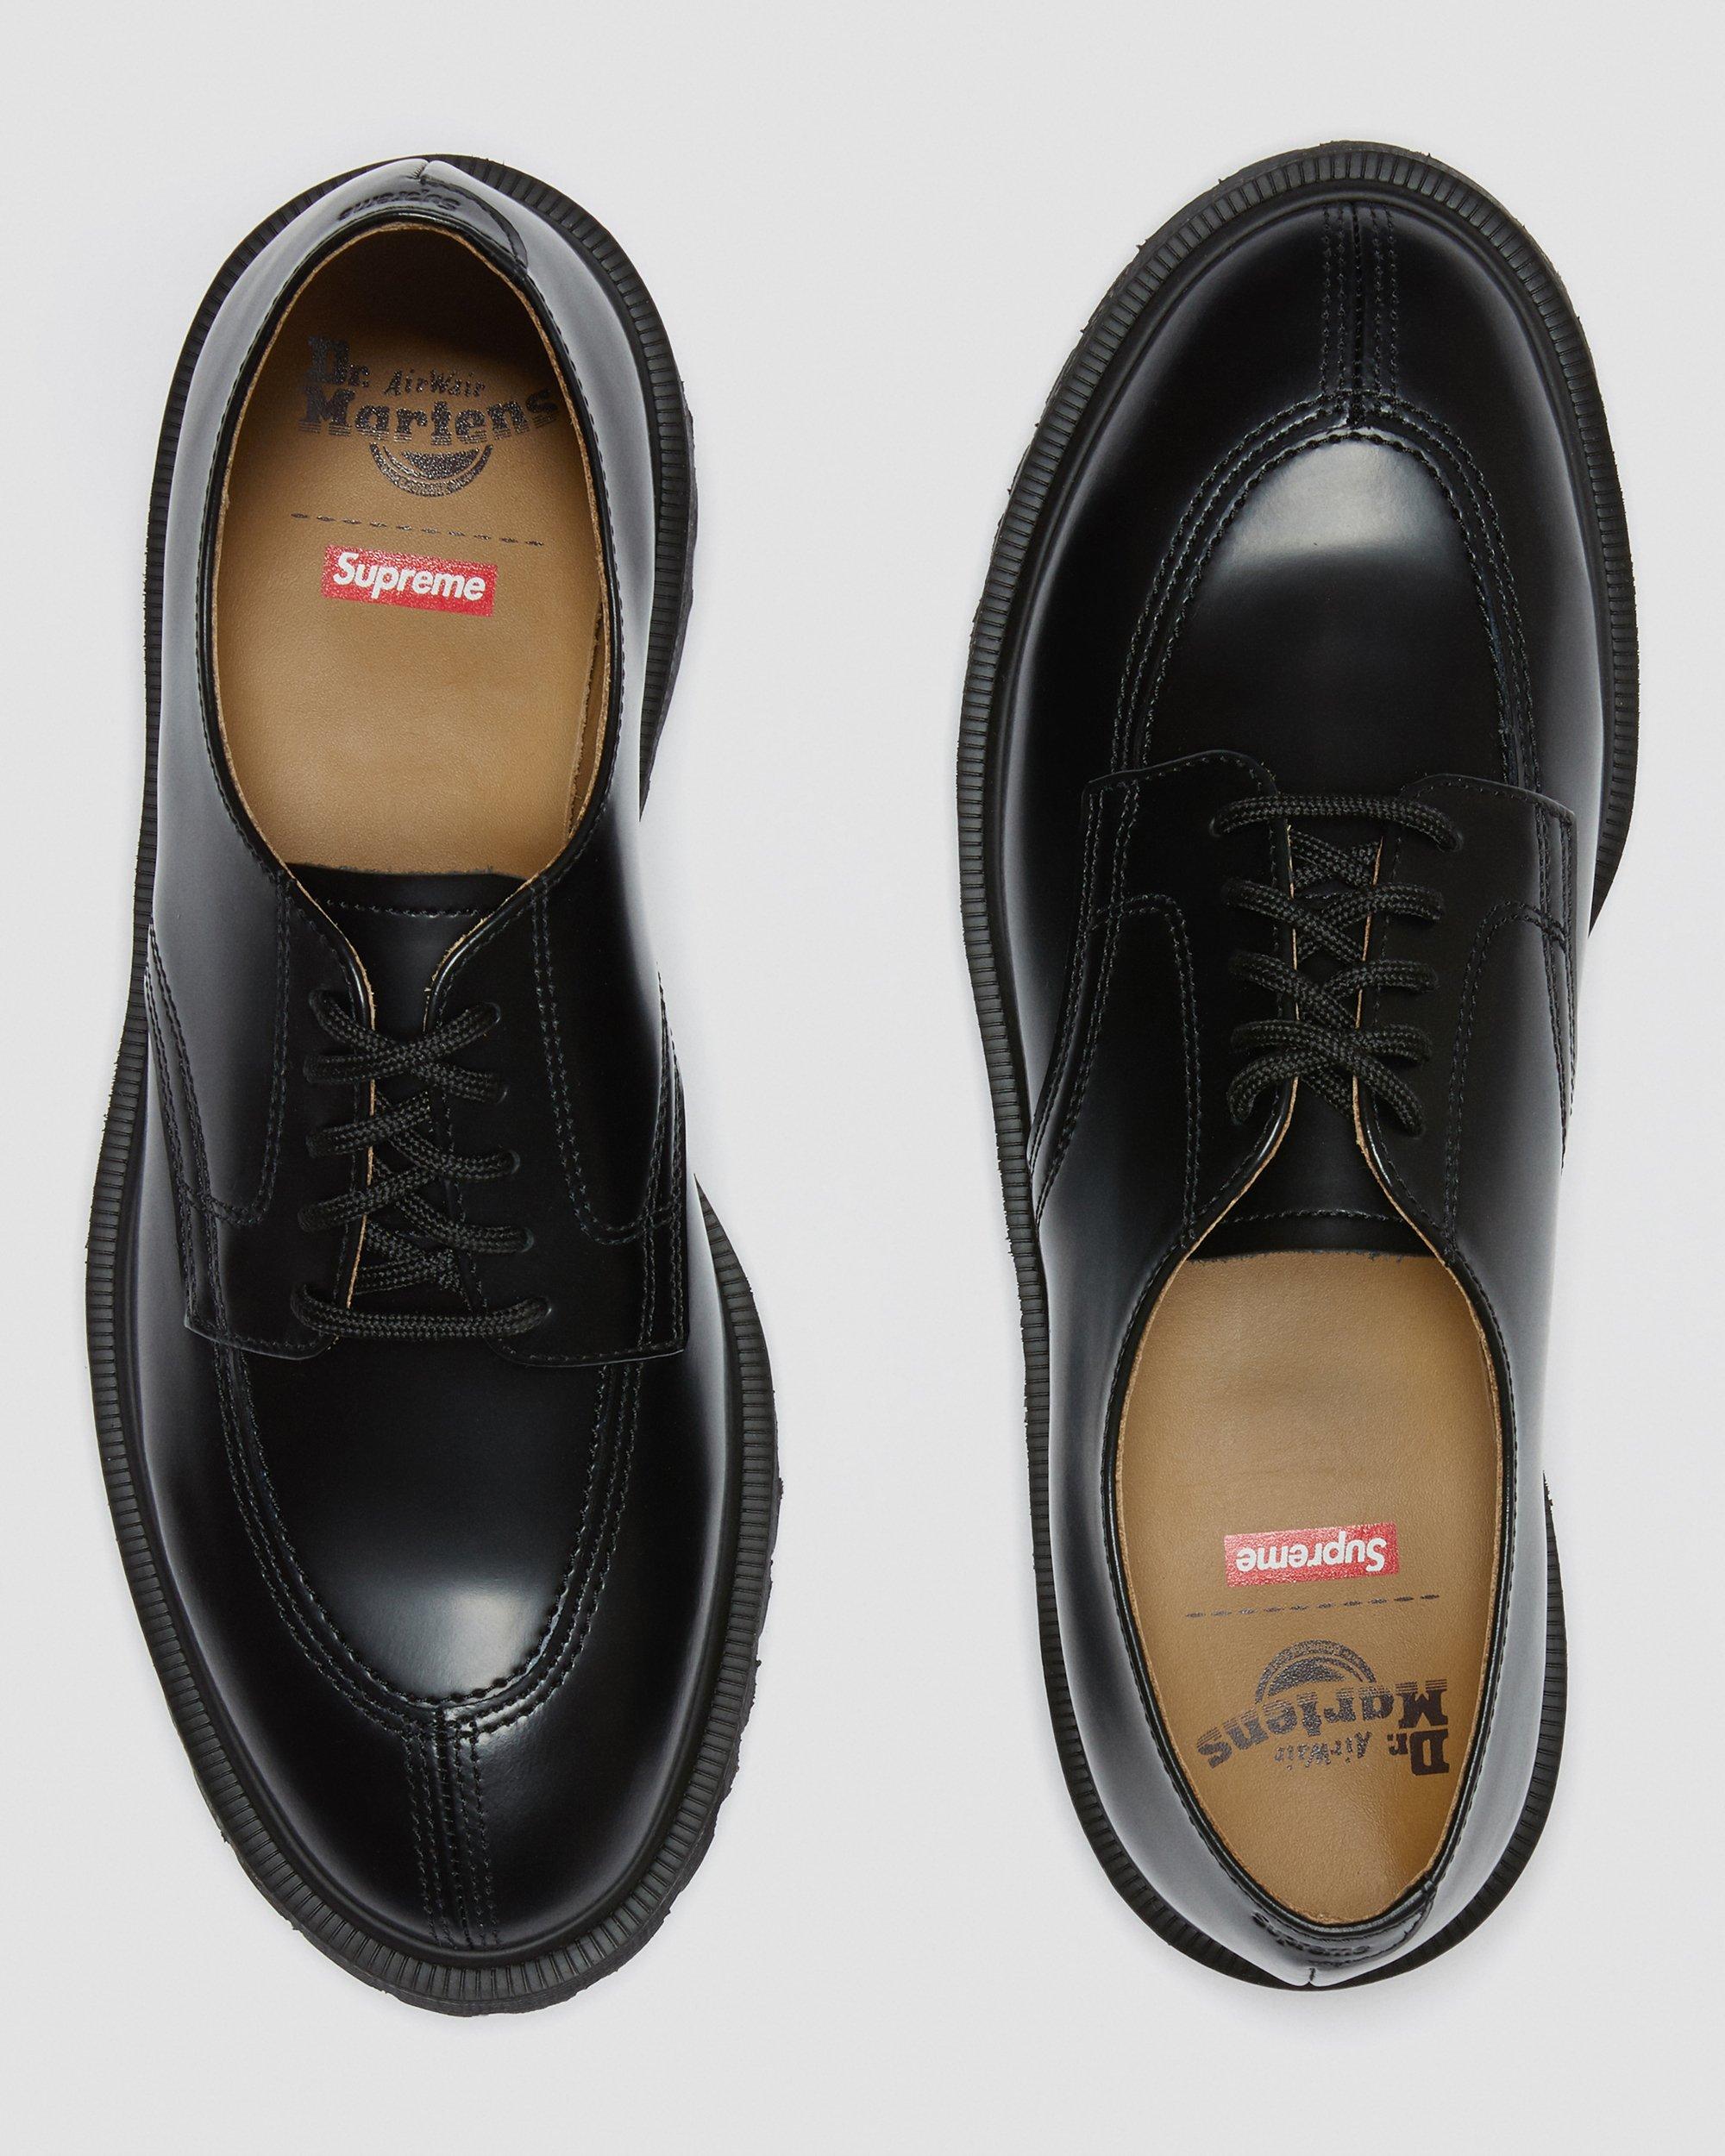 Supreme® 2046 Smooth Leather Oxford Shoes | Dr. Martens